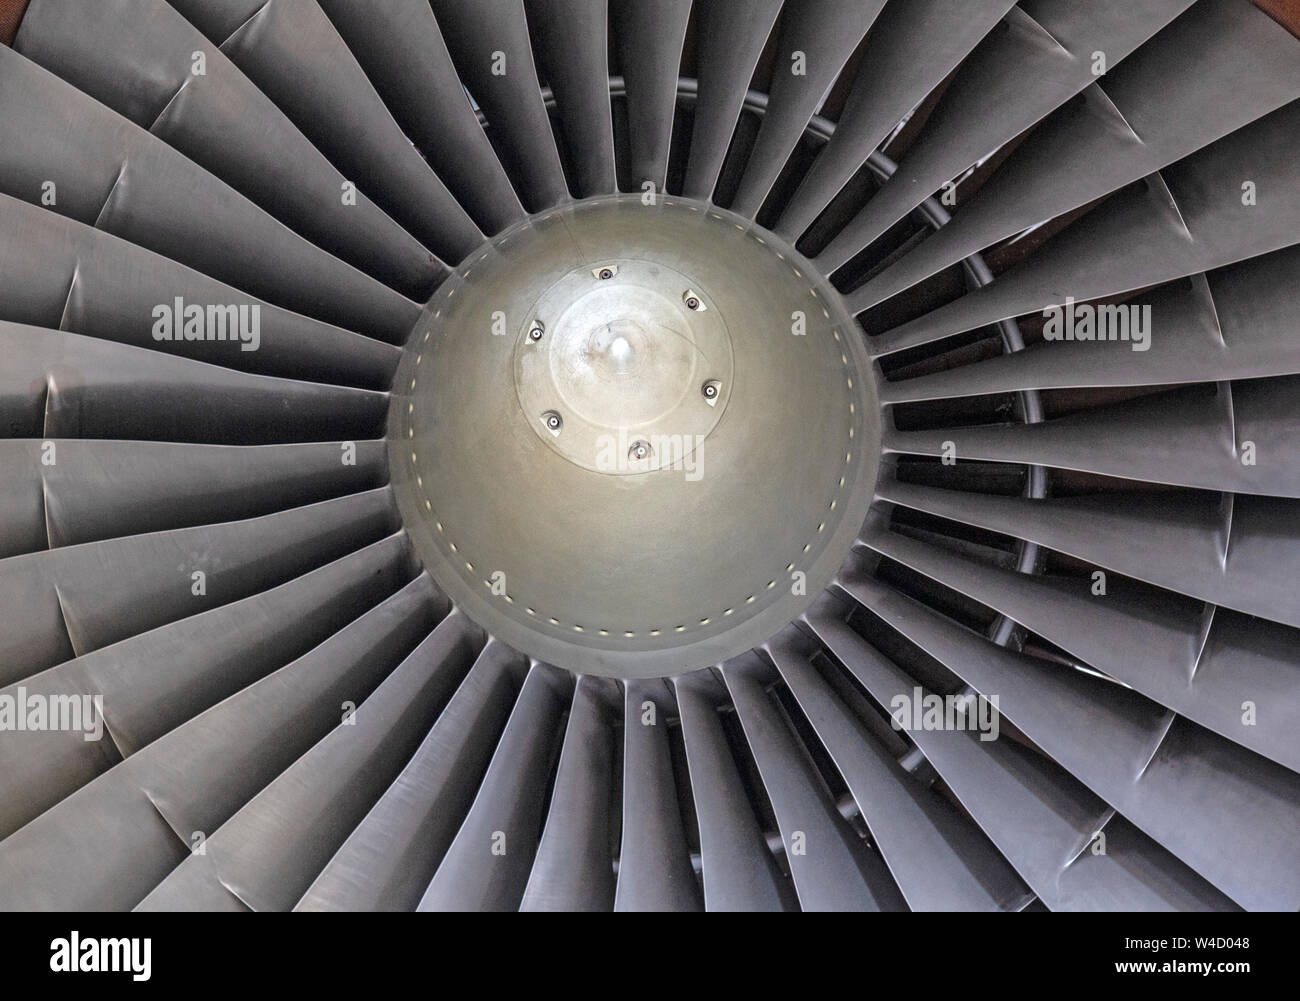 Details of a large jet engine, showing the fan blades and central hub. Stock Photo